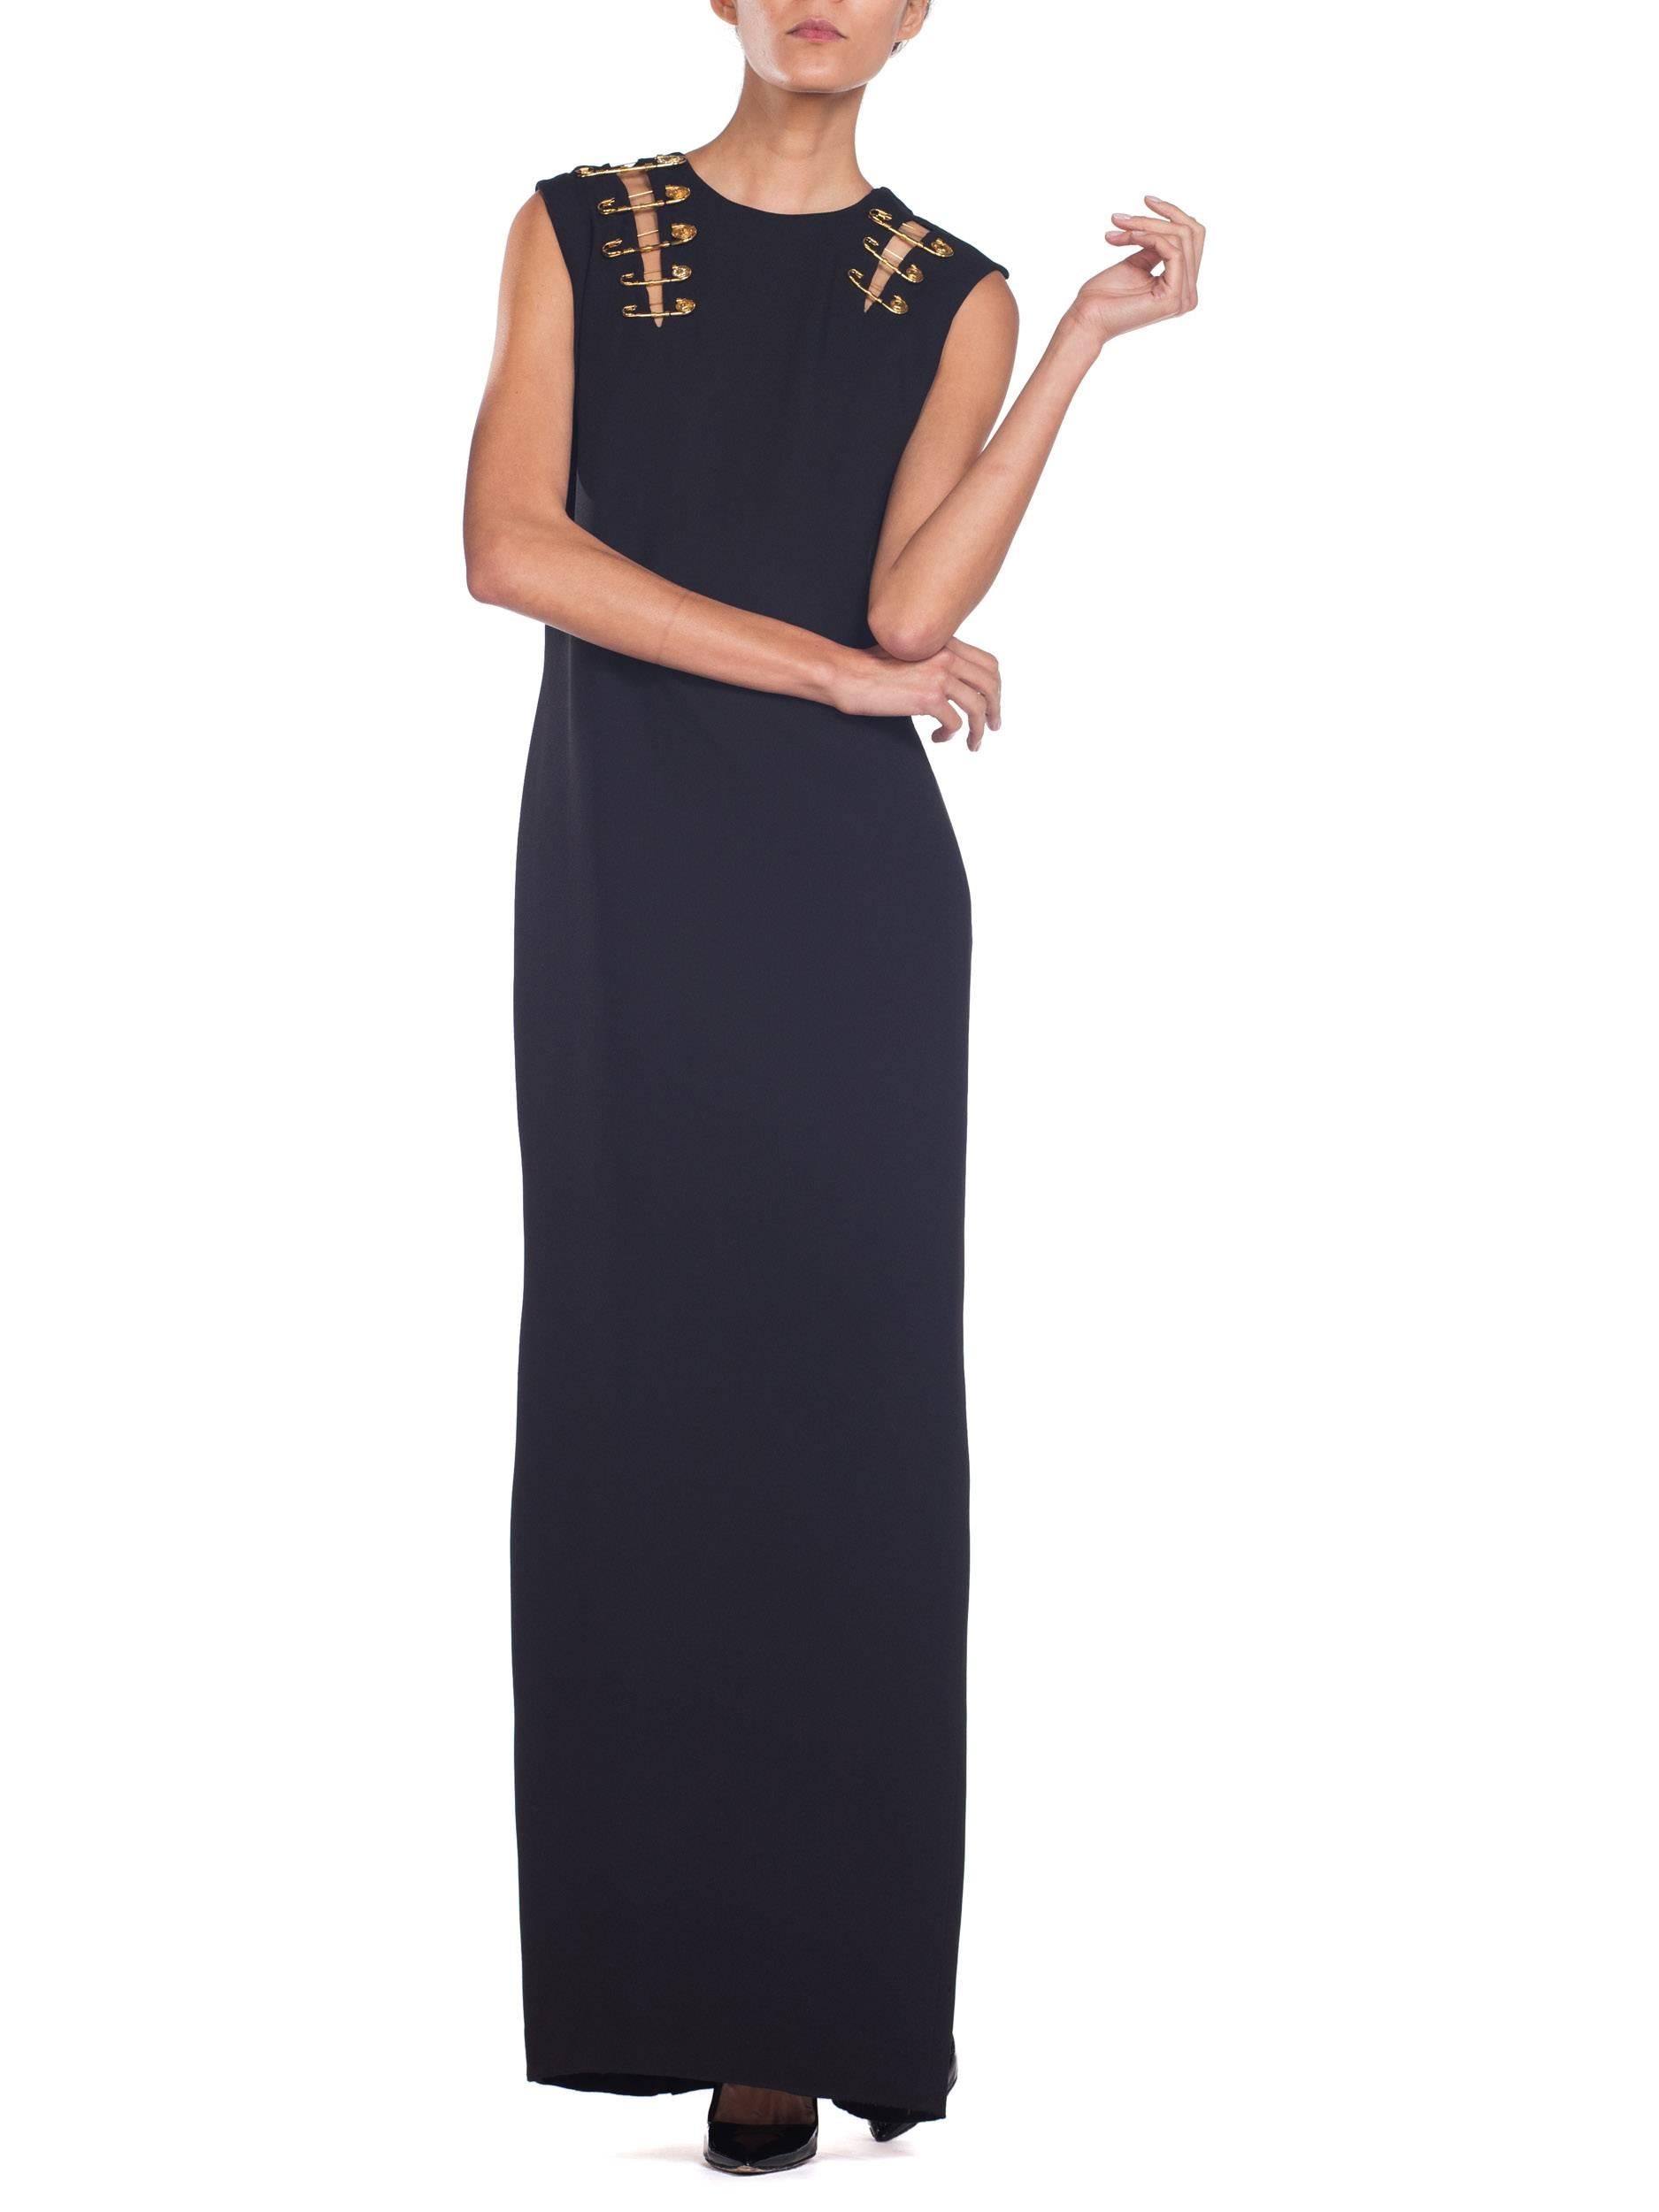 1990S GIANNI VERSACE Black Silk Crepe Gold Safey Pin Gown For Sale 1